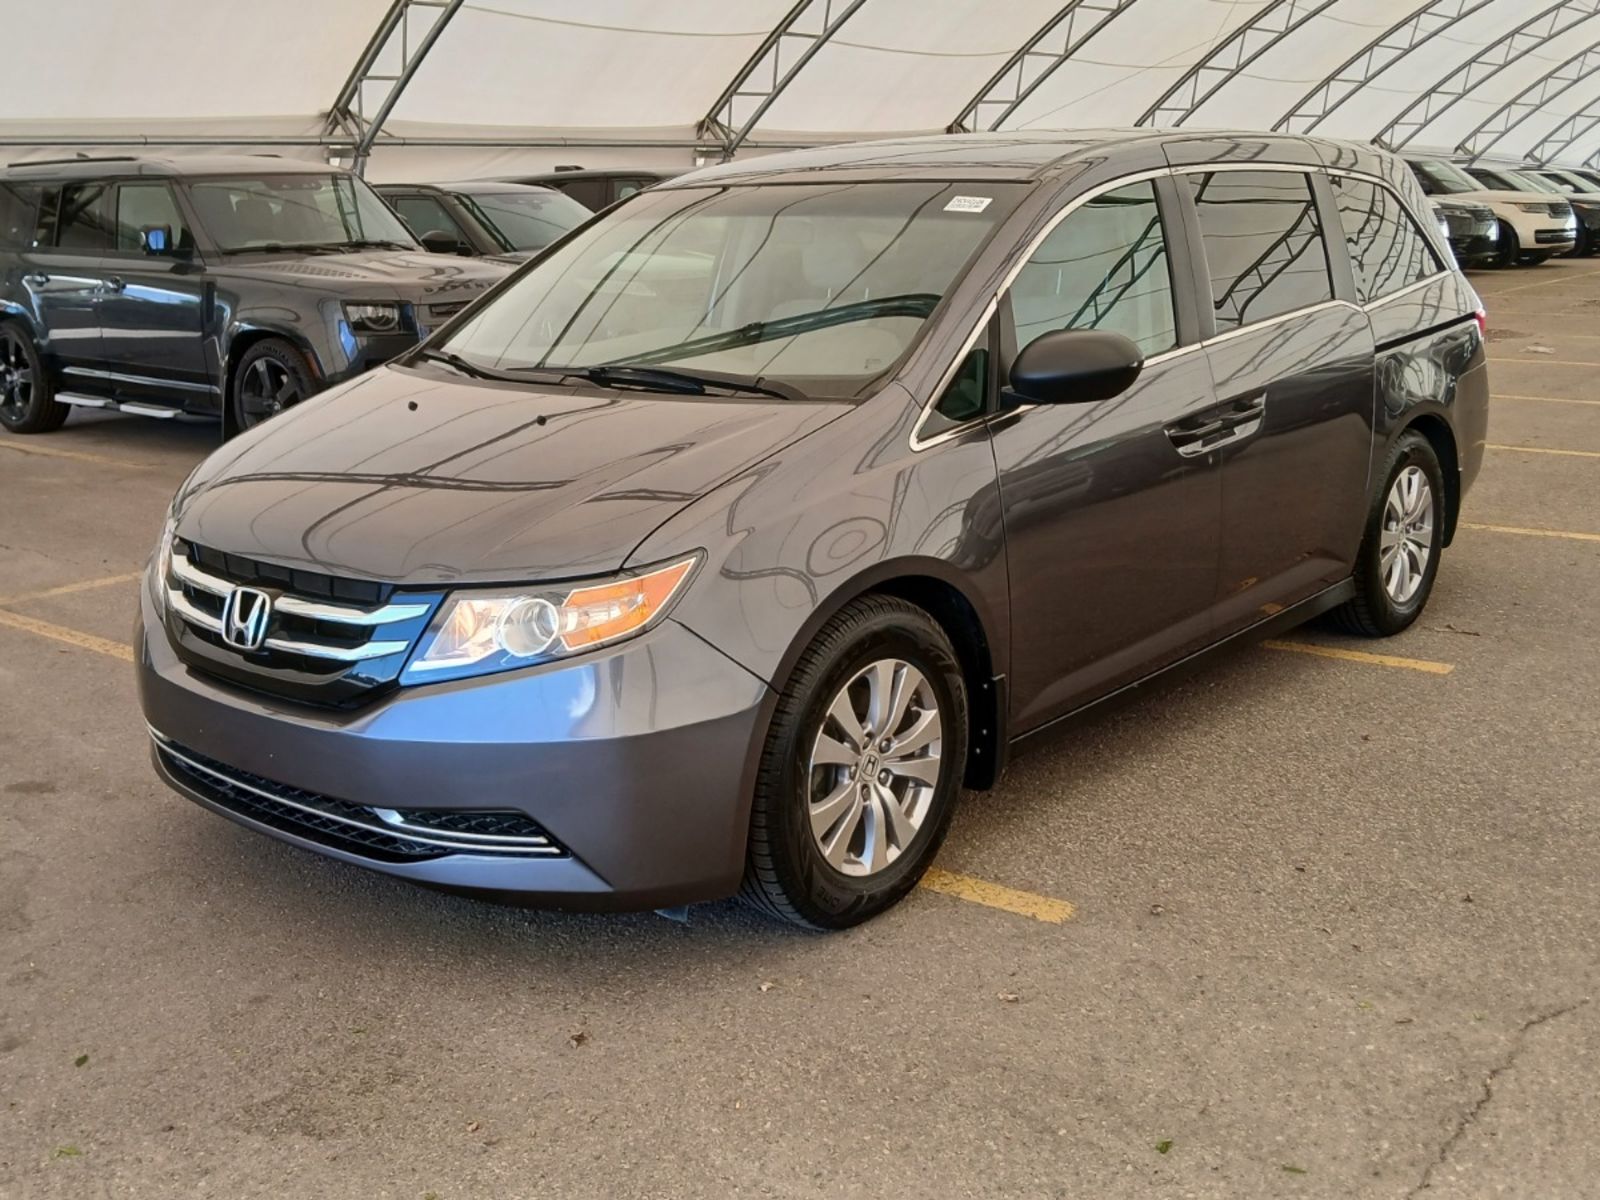 2016 Honda Odyssey SE - One Owner | Dual-Zone Climate Control